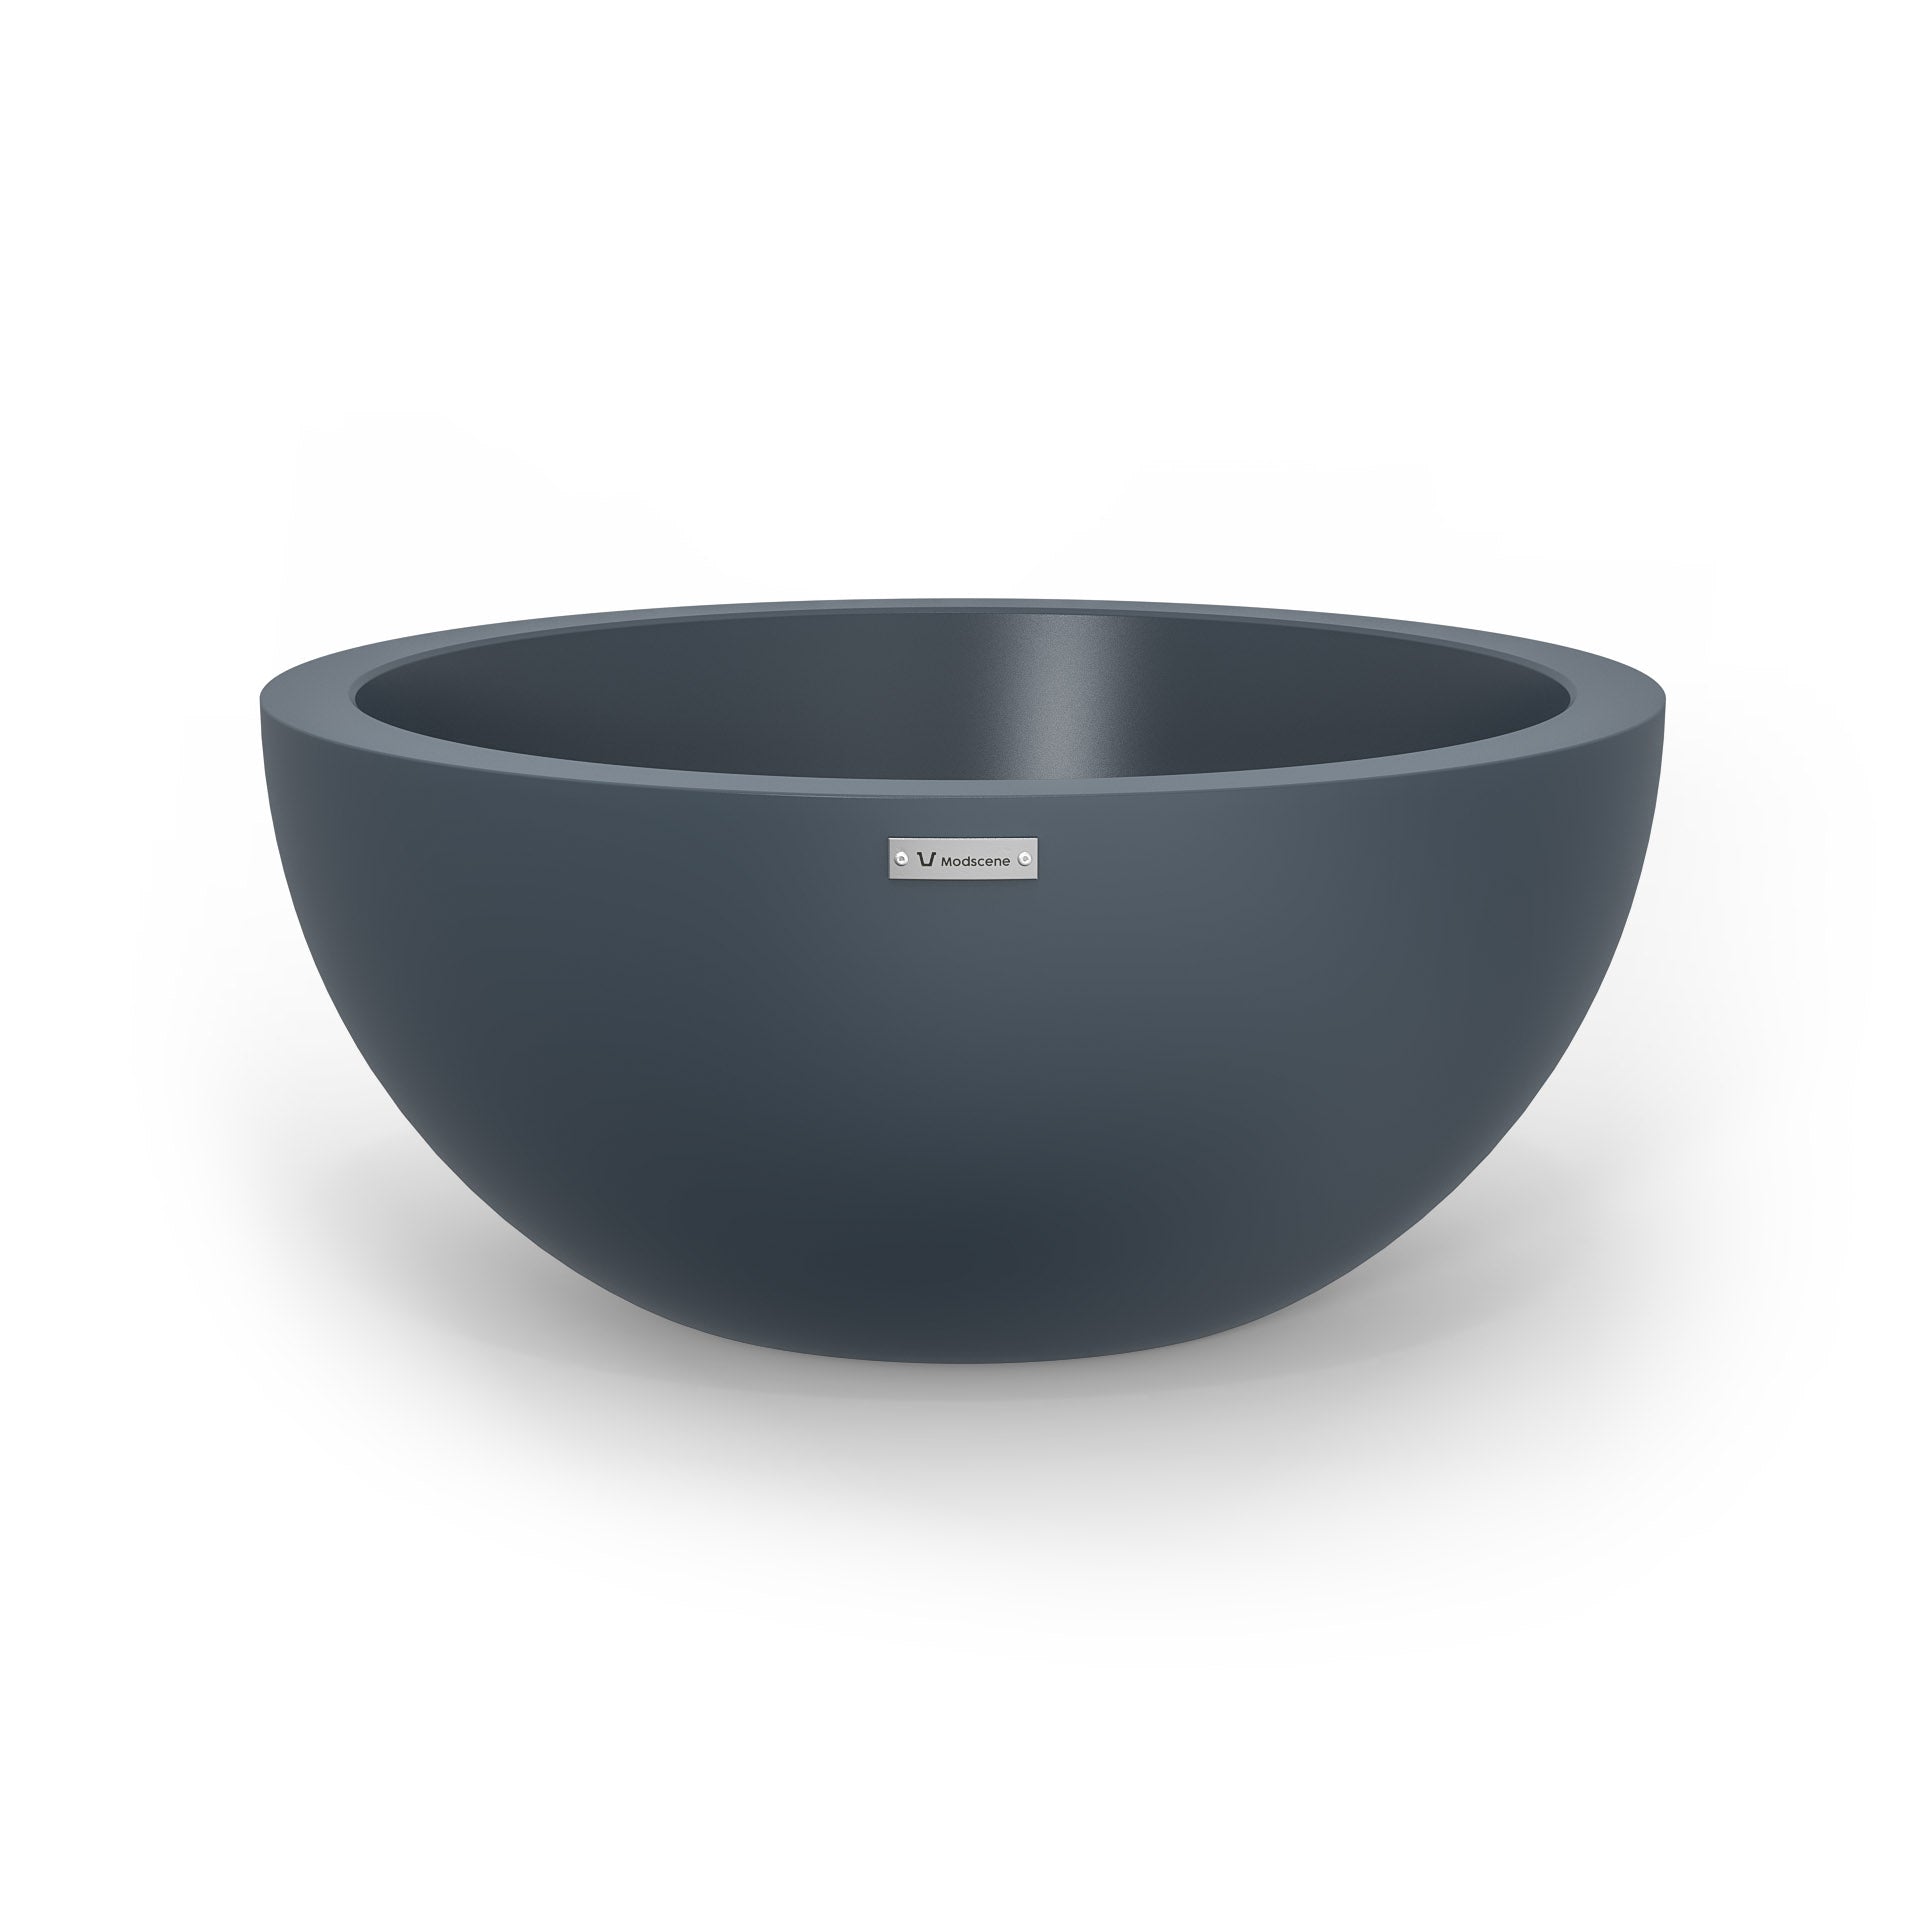 A large planter bowl in a storm blue colour made by Modscene.